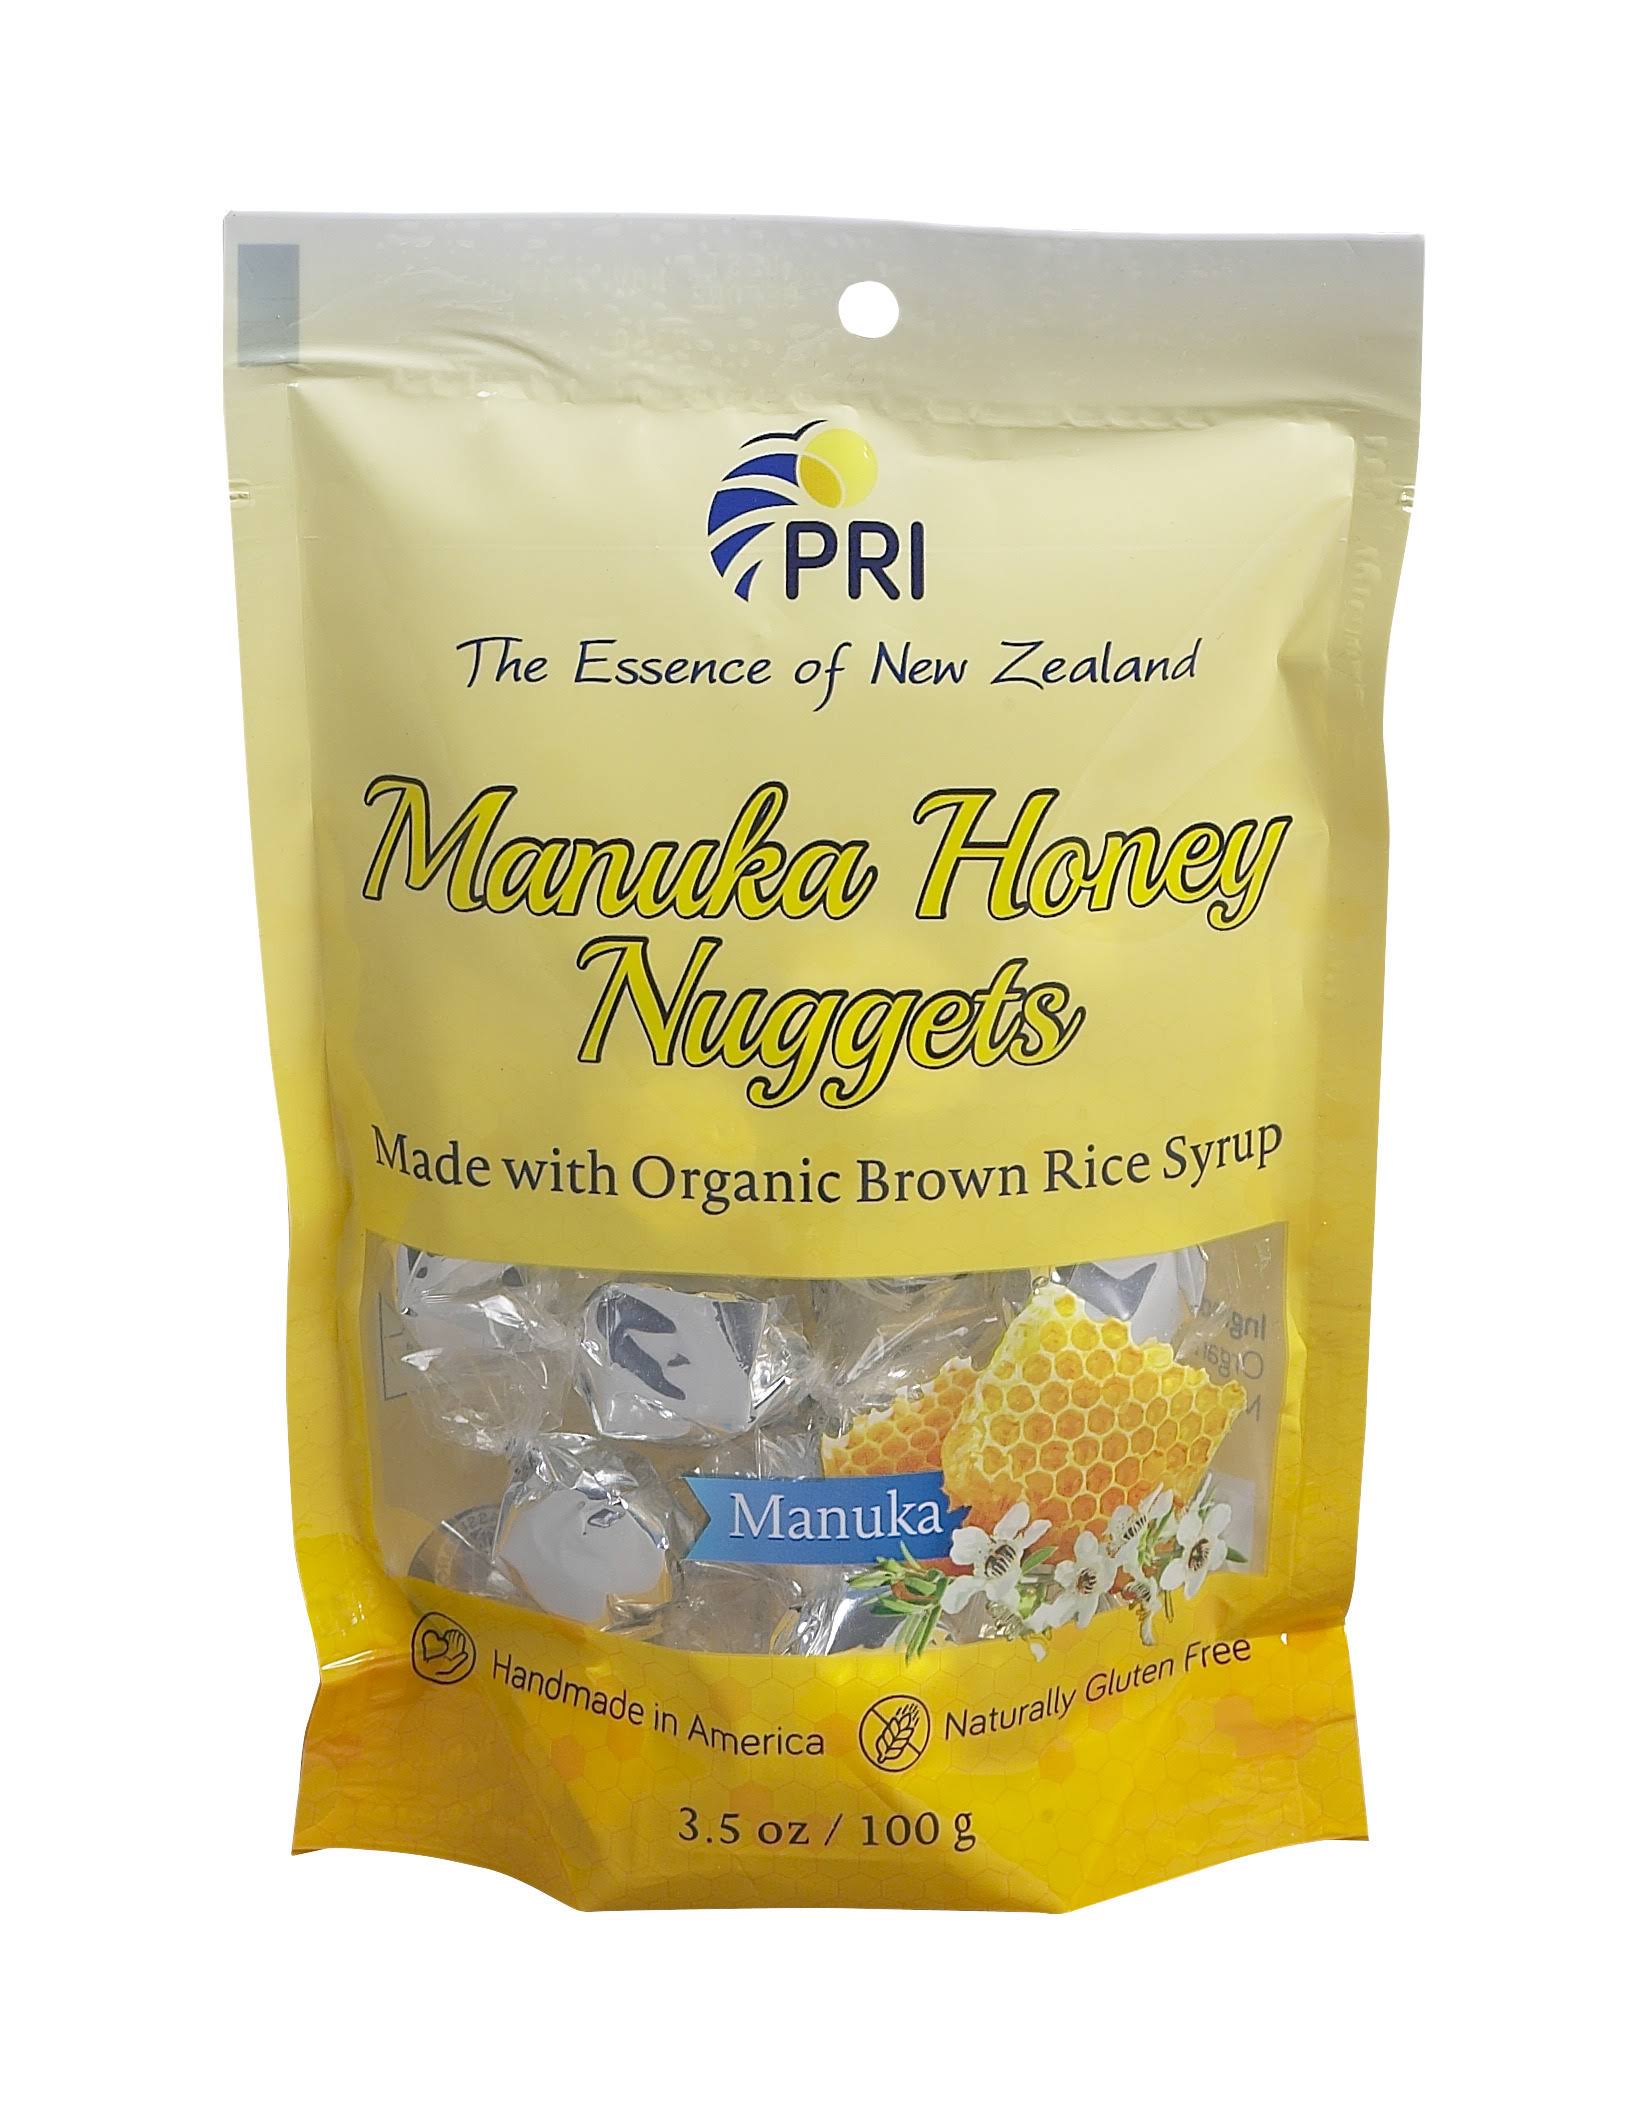 Pacific Resources New Zealand Manuka Honey Nuggets - 100g